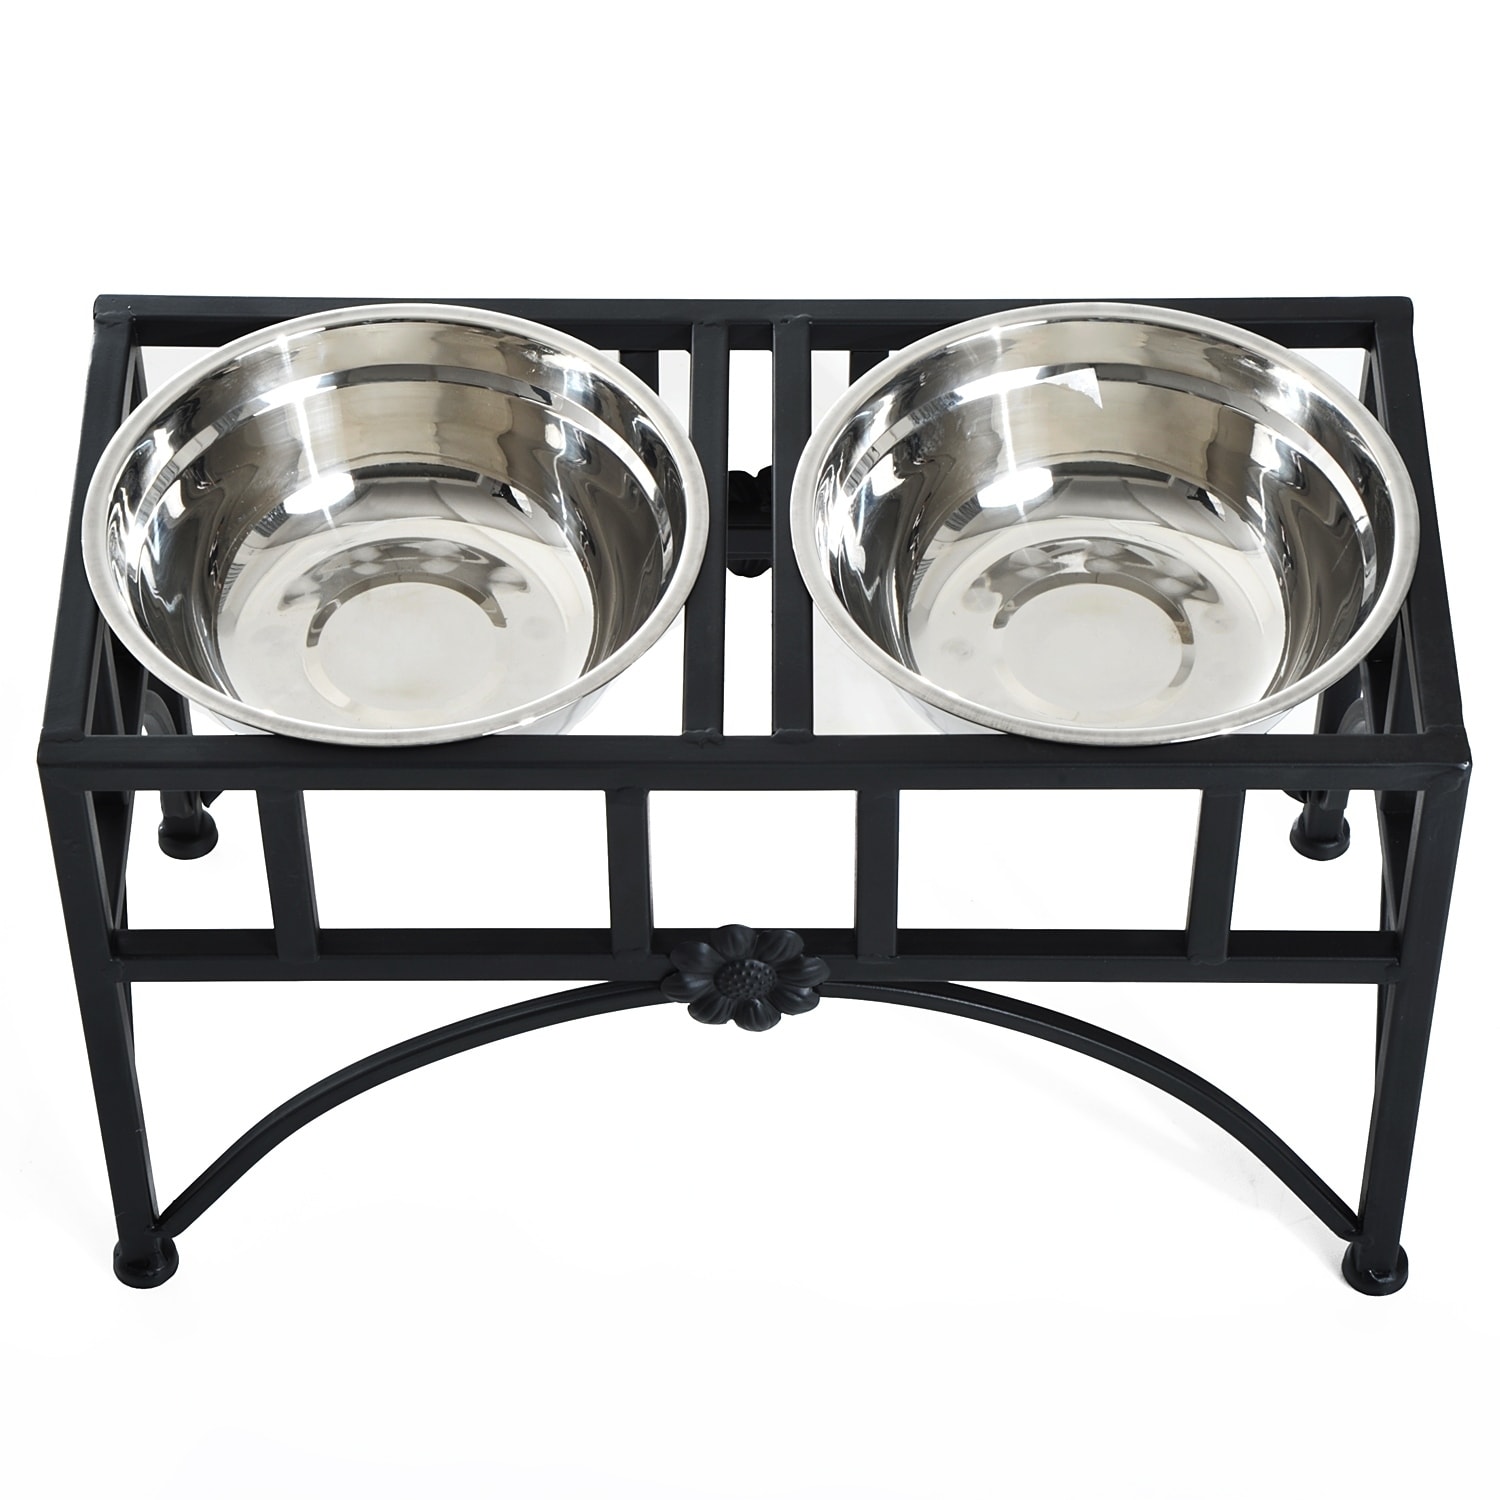 https://ak1.ostkcdn.com/images/products/22501422/PawHut-22-Double-Stainless-Steel-Heavy-Duty-Dog-Food-Bowl-Pet-Elevated-Feeding-Station-2b1d70e1-c0e6-44aa-9030-ddc58bae7a08.jpg